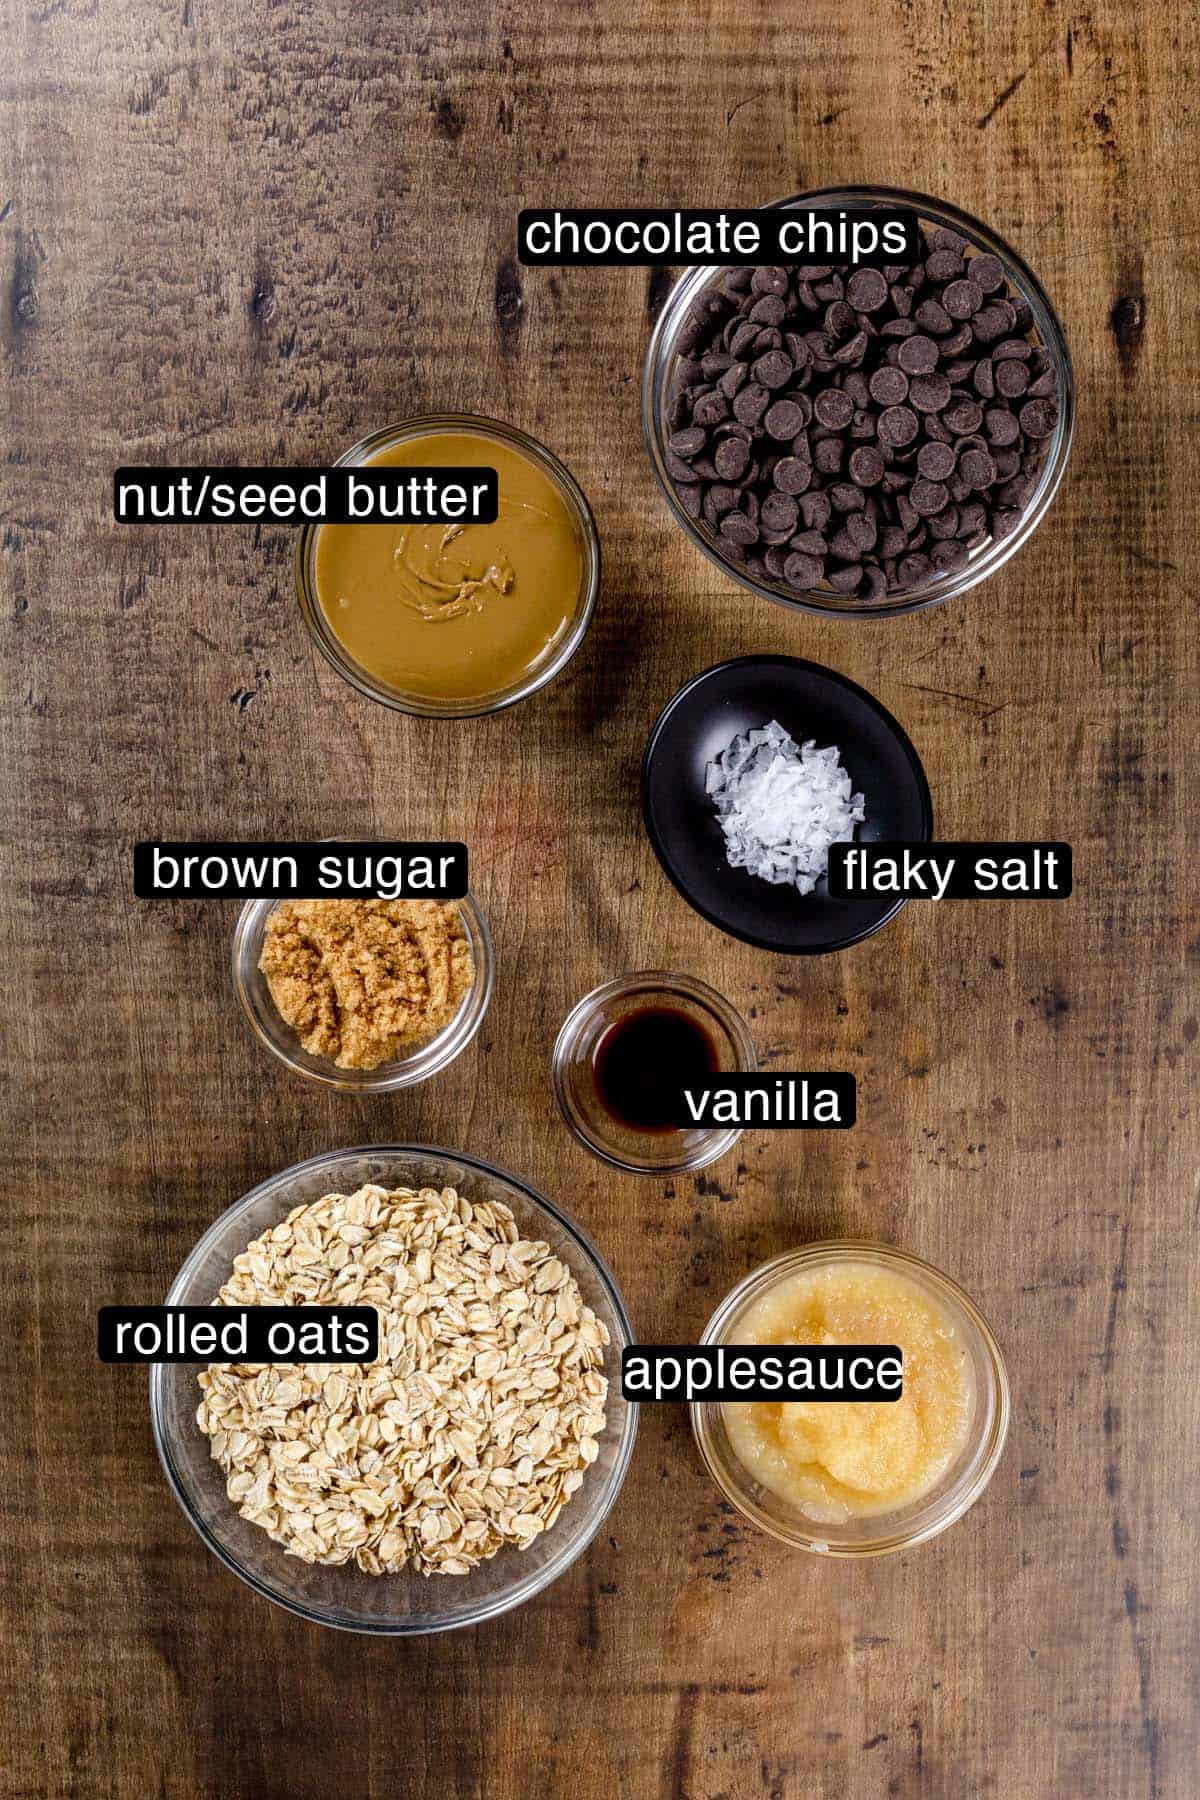 Ingredients for granola bark in various glass bowls on a wood table top. Black and white labels have been added to name each ingredient like oatmeal and applesauce.